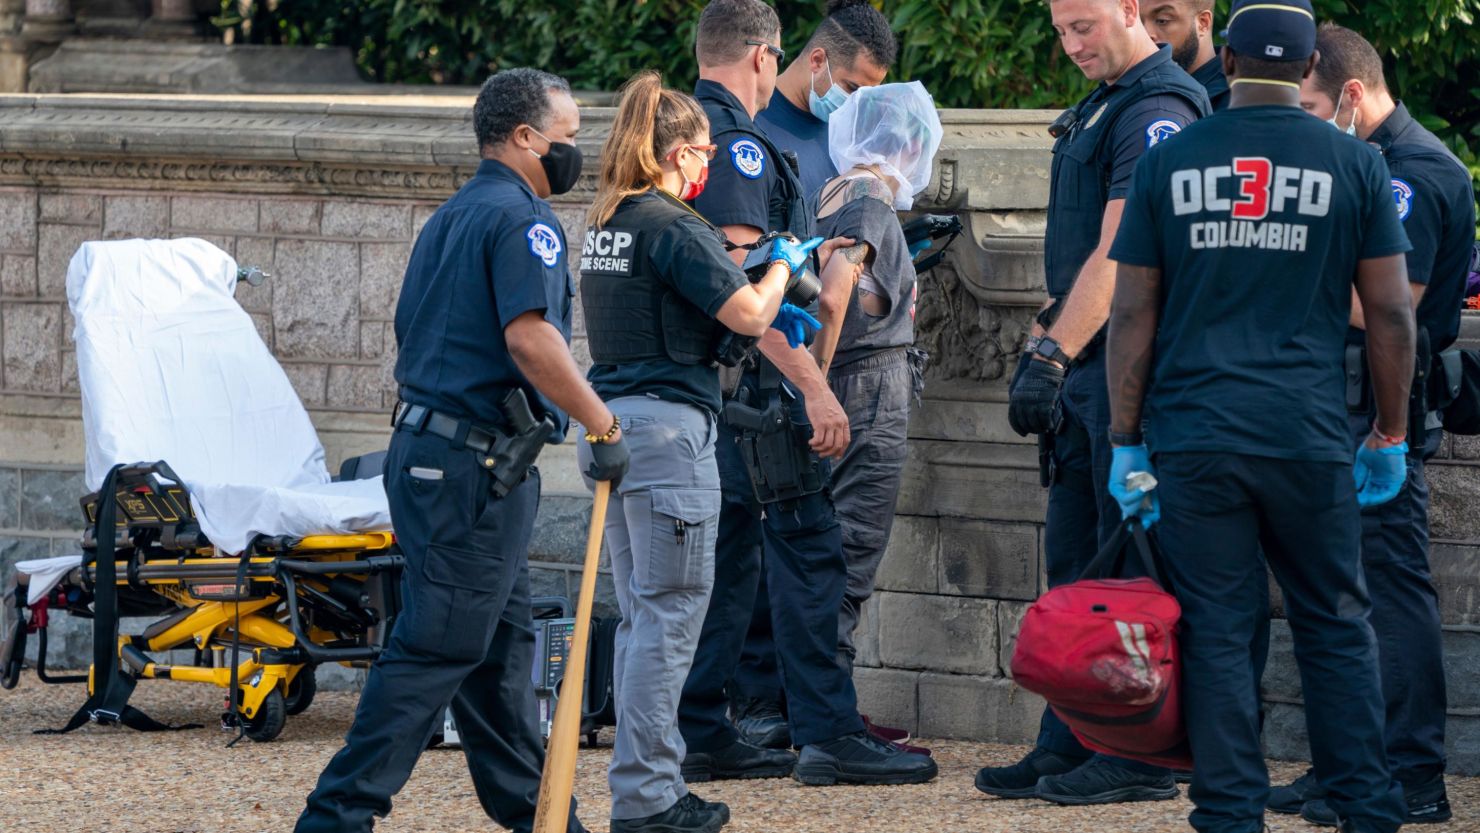 A protester is arrested following a reported attack on a Capitol police officer on the West Front of the US Capitol in Washington, on October 15, 2021. The arrest was prior to the Build Back Fossil Free march to the US Capitol that is calling on President Joe Biden to declare a climate emergency and stop all new fossil fuel projects. 